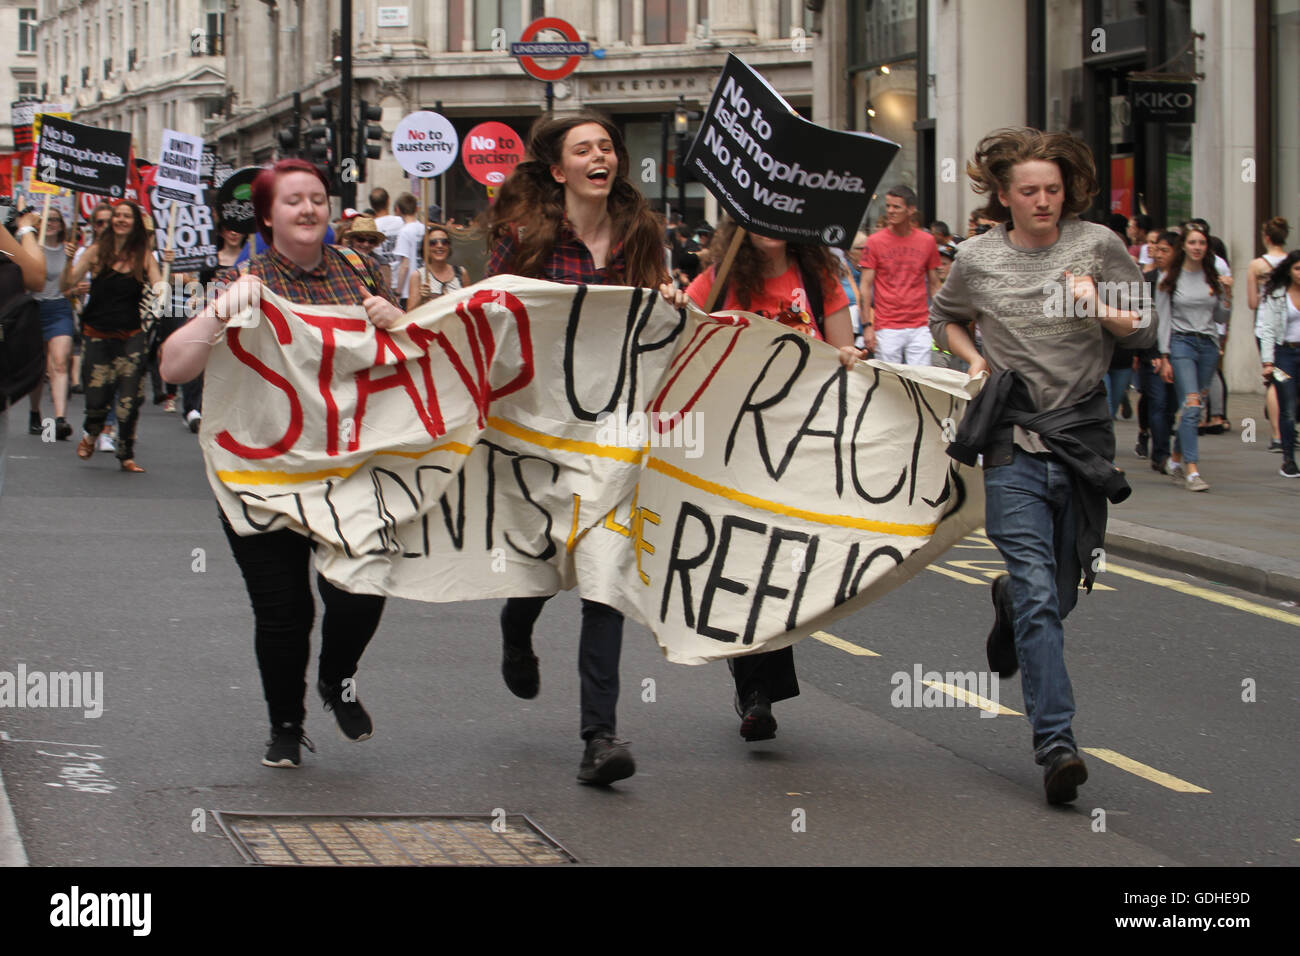 London, UK. 16th July, 2016: Protesters run to catch up on the march at Regent Street. Hundreds of people take part in a demonstration outside the BBC offices at Portland Place and march to Parliament Square WC1, united in demanding for an end to Austerity, No To Racism and demanding and end to the Tory rule. The demonstration on 16 July called by the People's Assembly and Stand Up to Racism is the positive and united response After the Brexit referendum. Credit:  david mbiyu/Alamy Live News Stock Photo